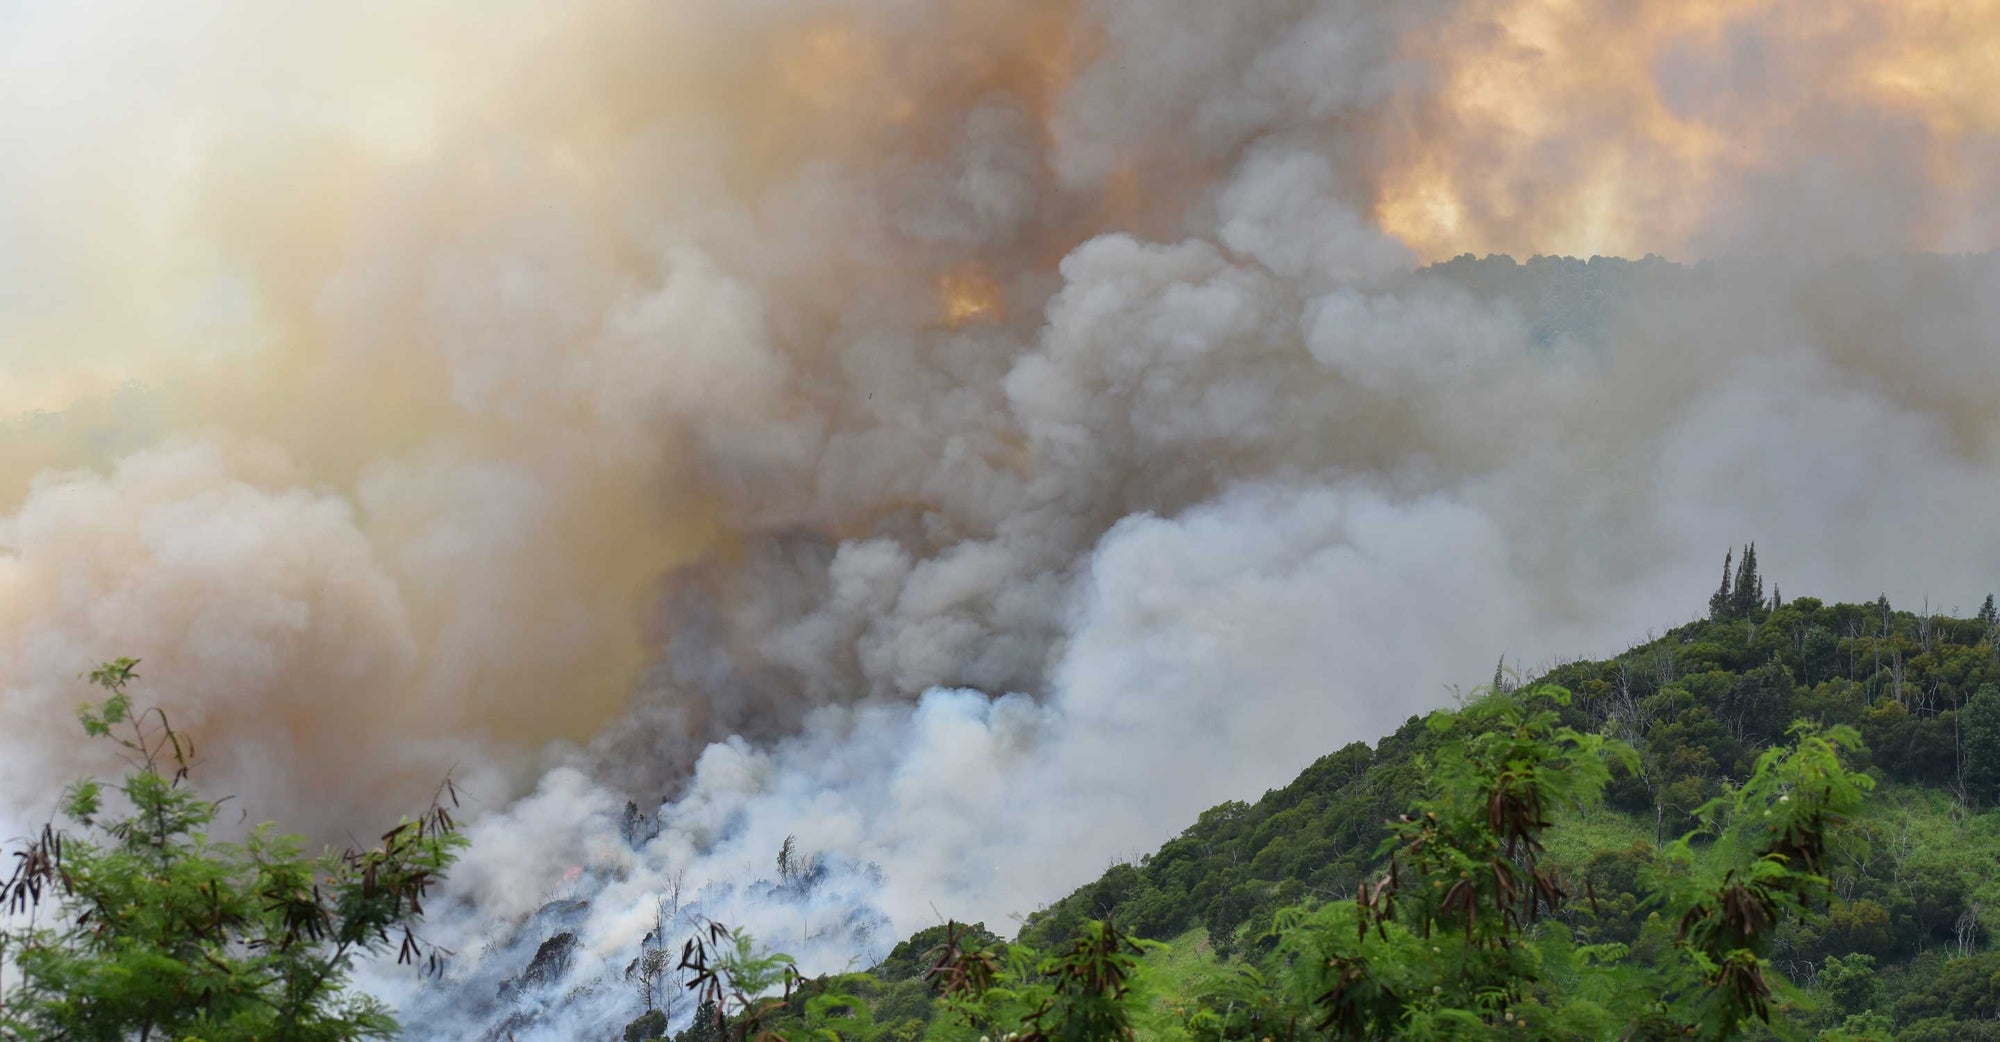 A wildfire burning in rural Central Oahu, Hawaii.